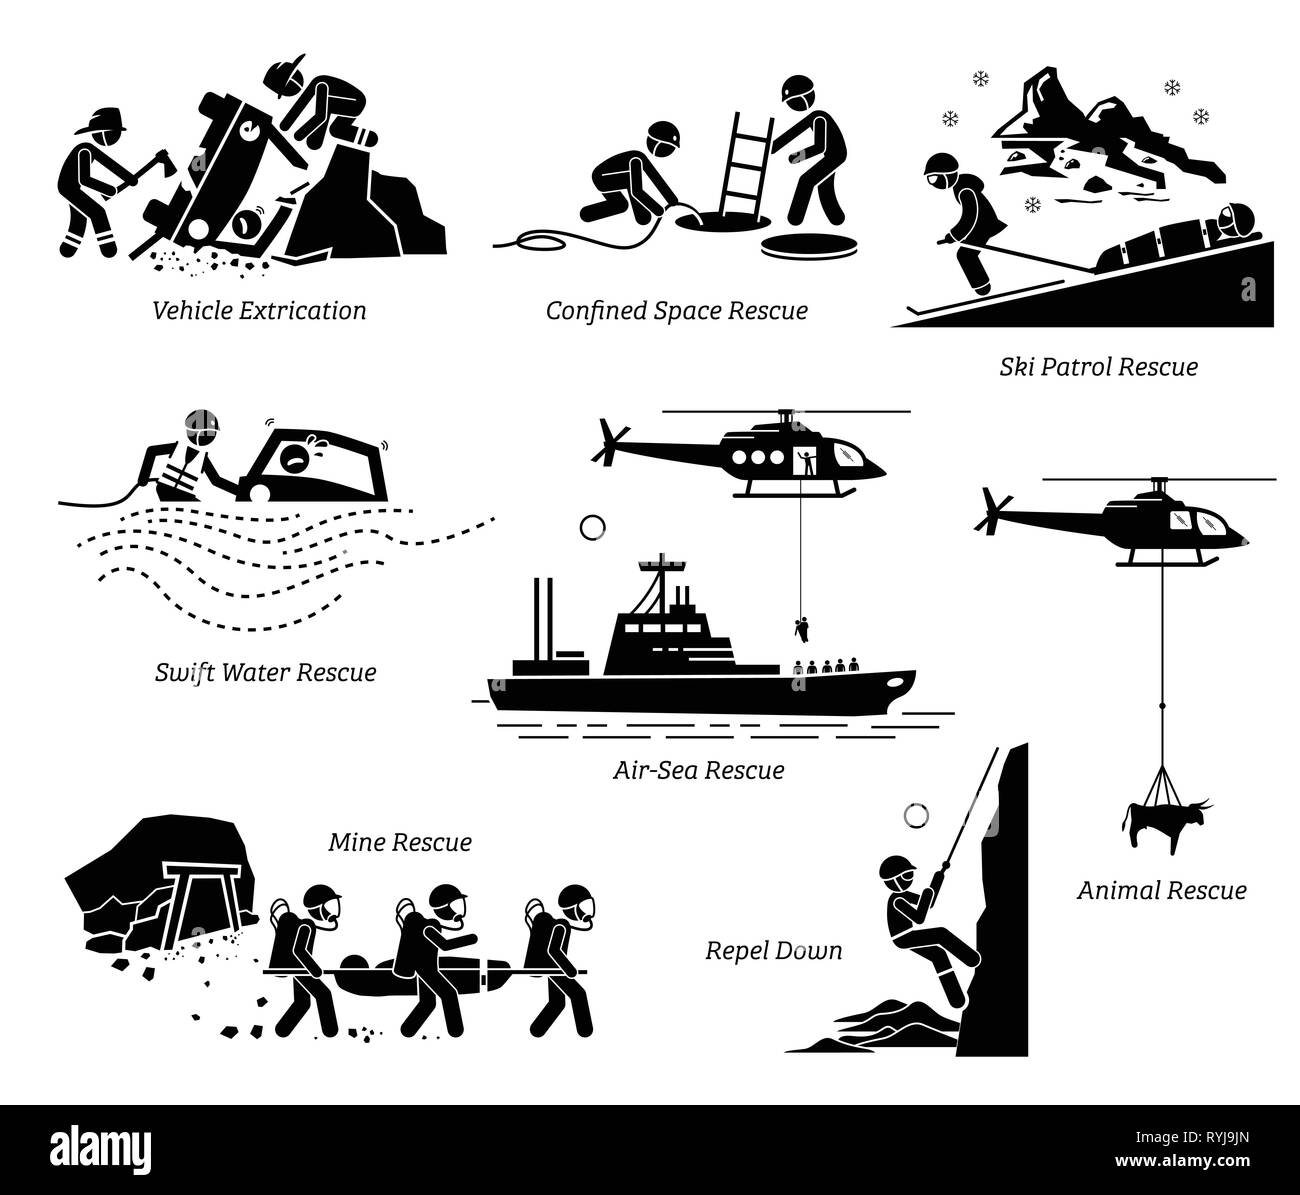 Rescue operations pictograms. Illustrations depict life saving and rescue operation in different places and situations for both human and animal. Stock Vector